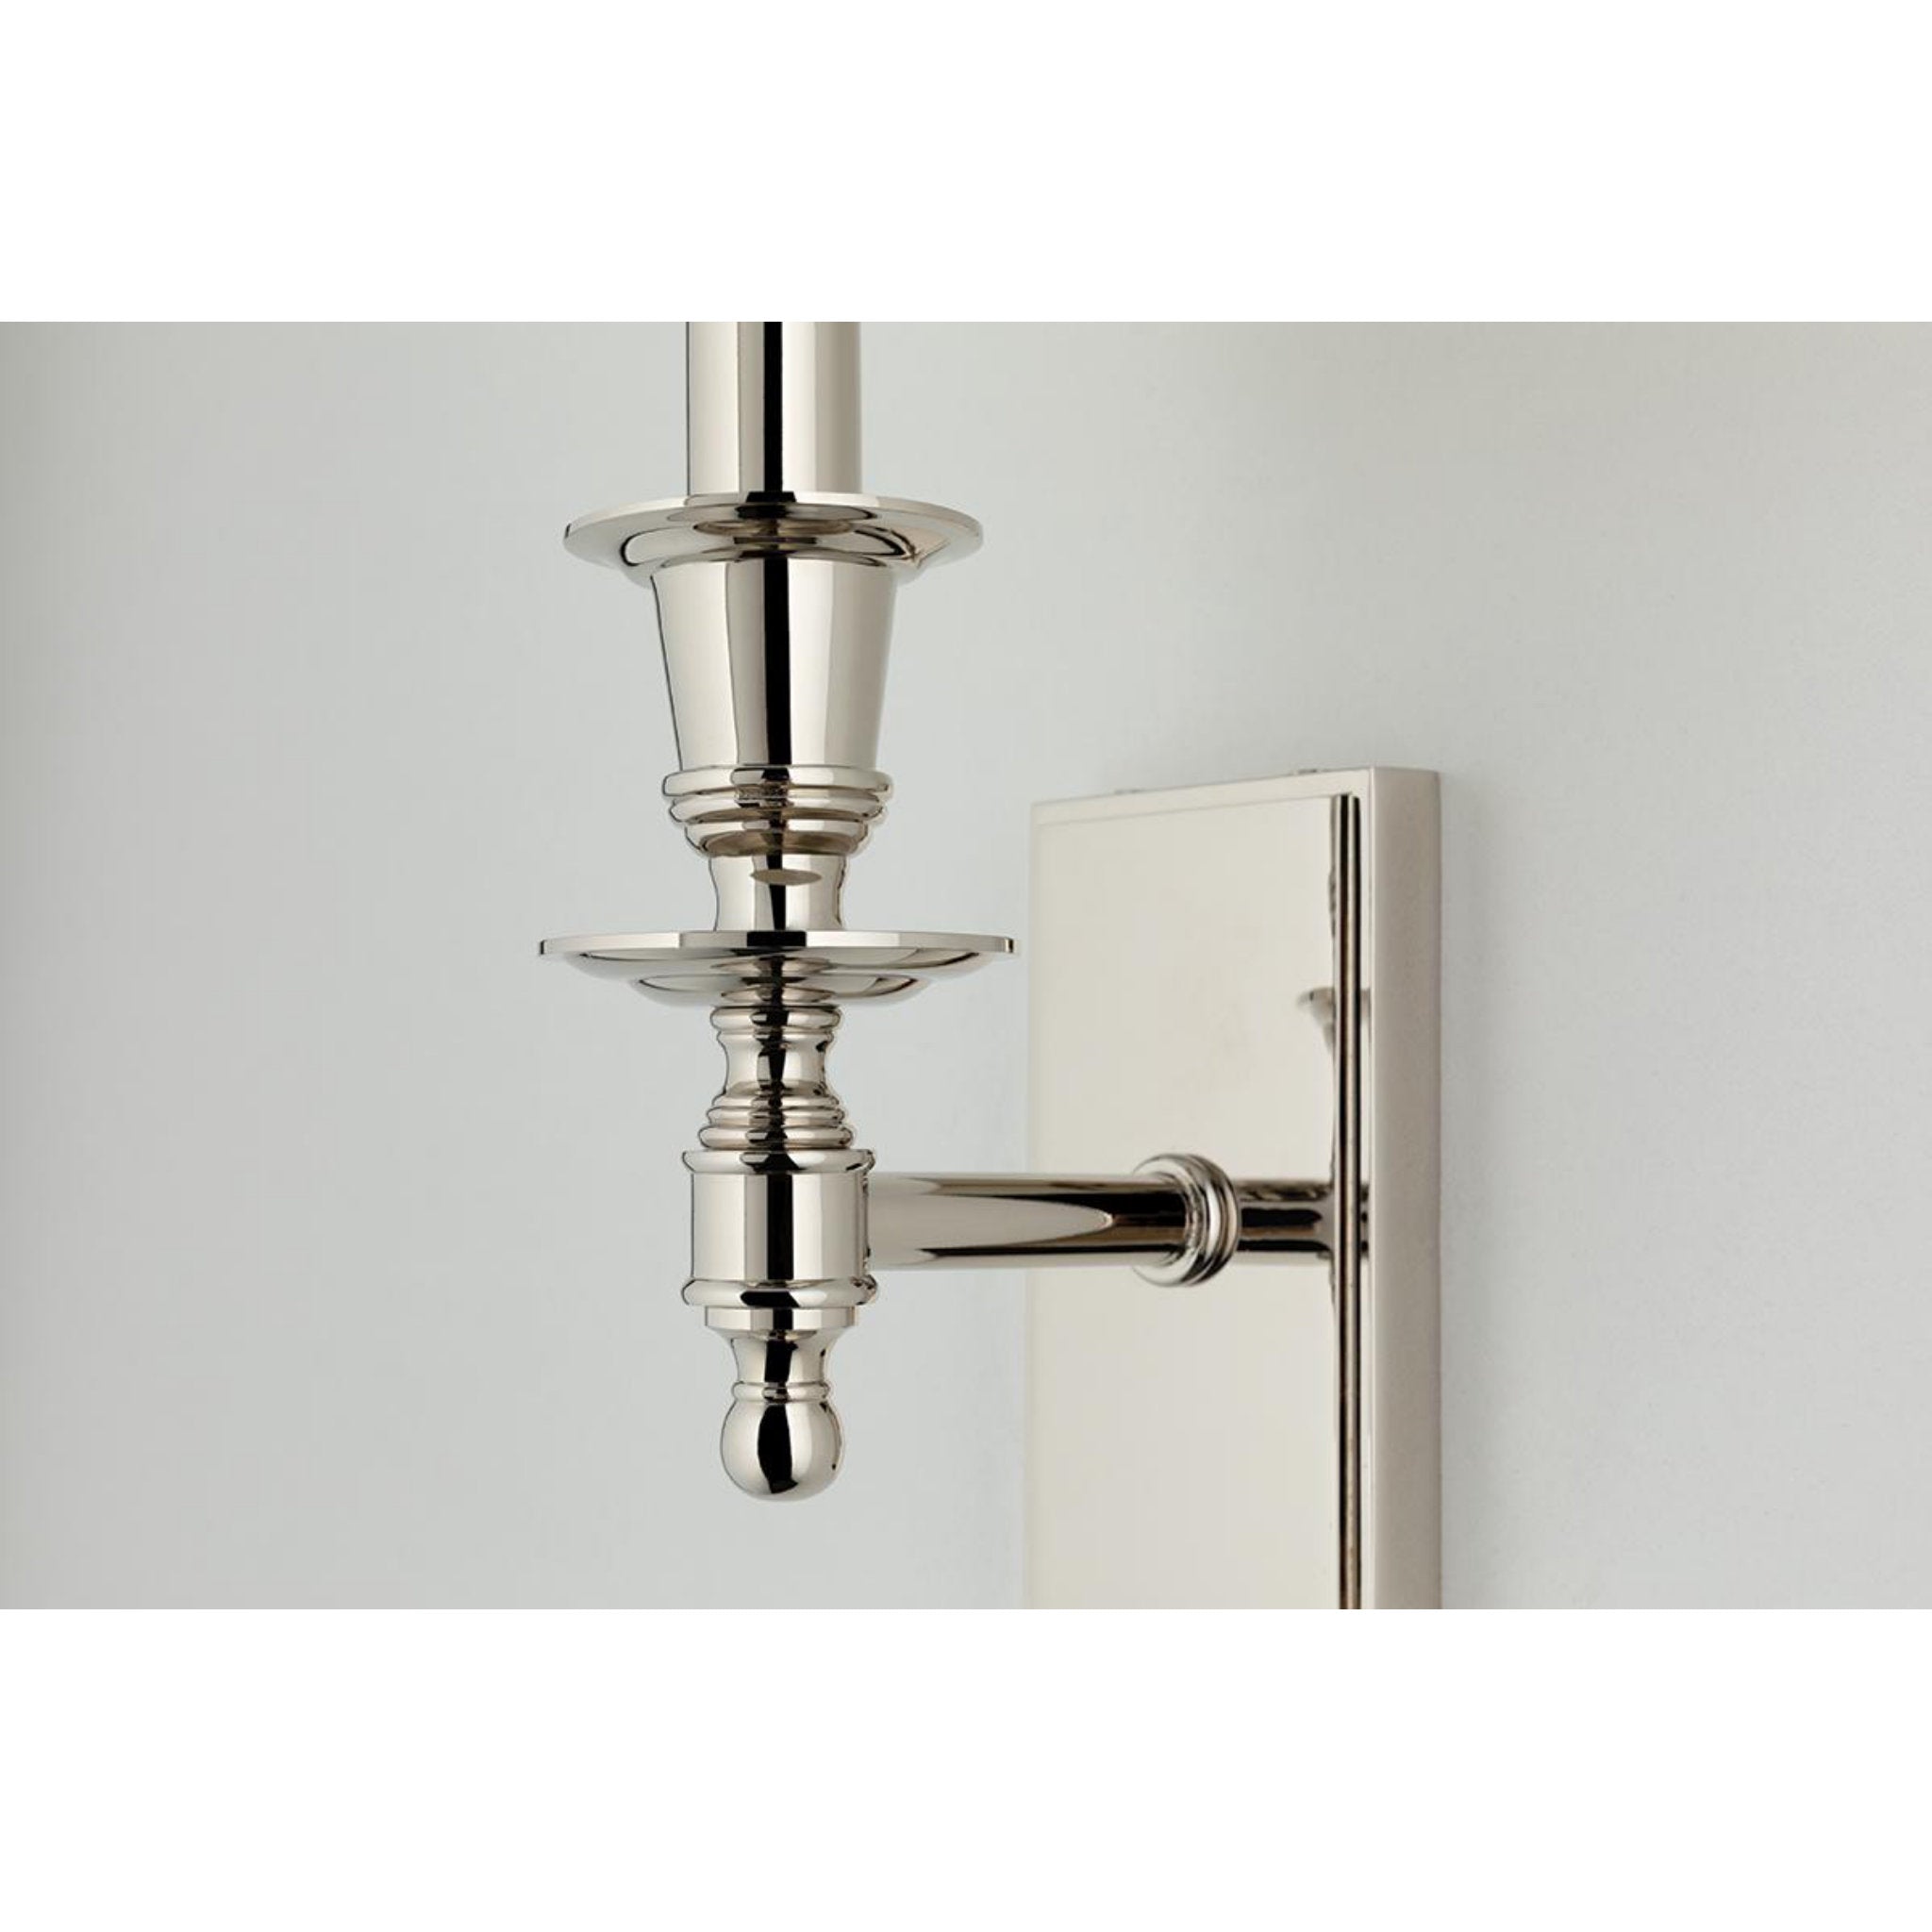 Ludlow 2 Light Wall Sconce in Polished Nickel